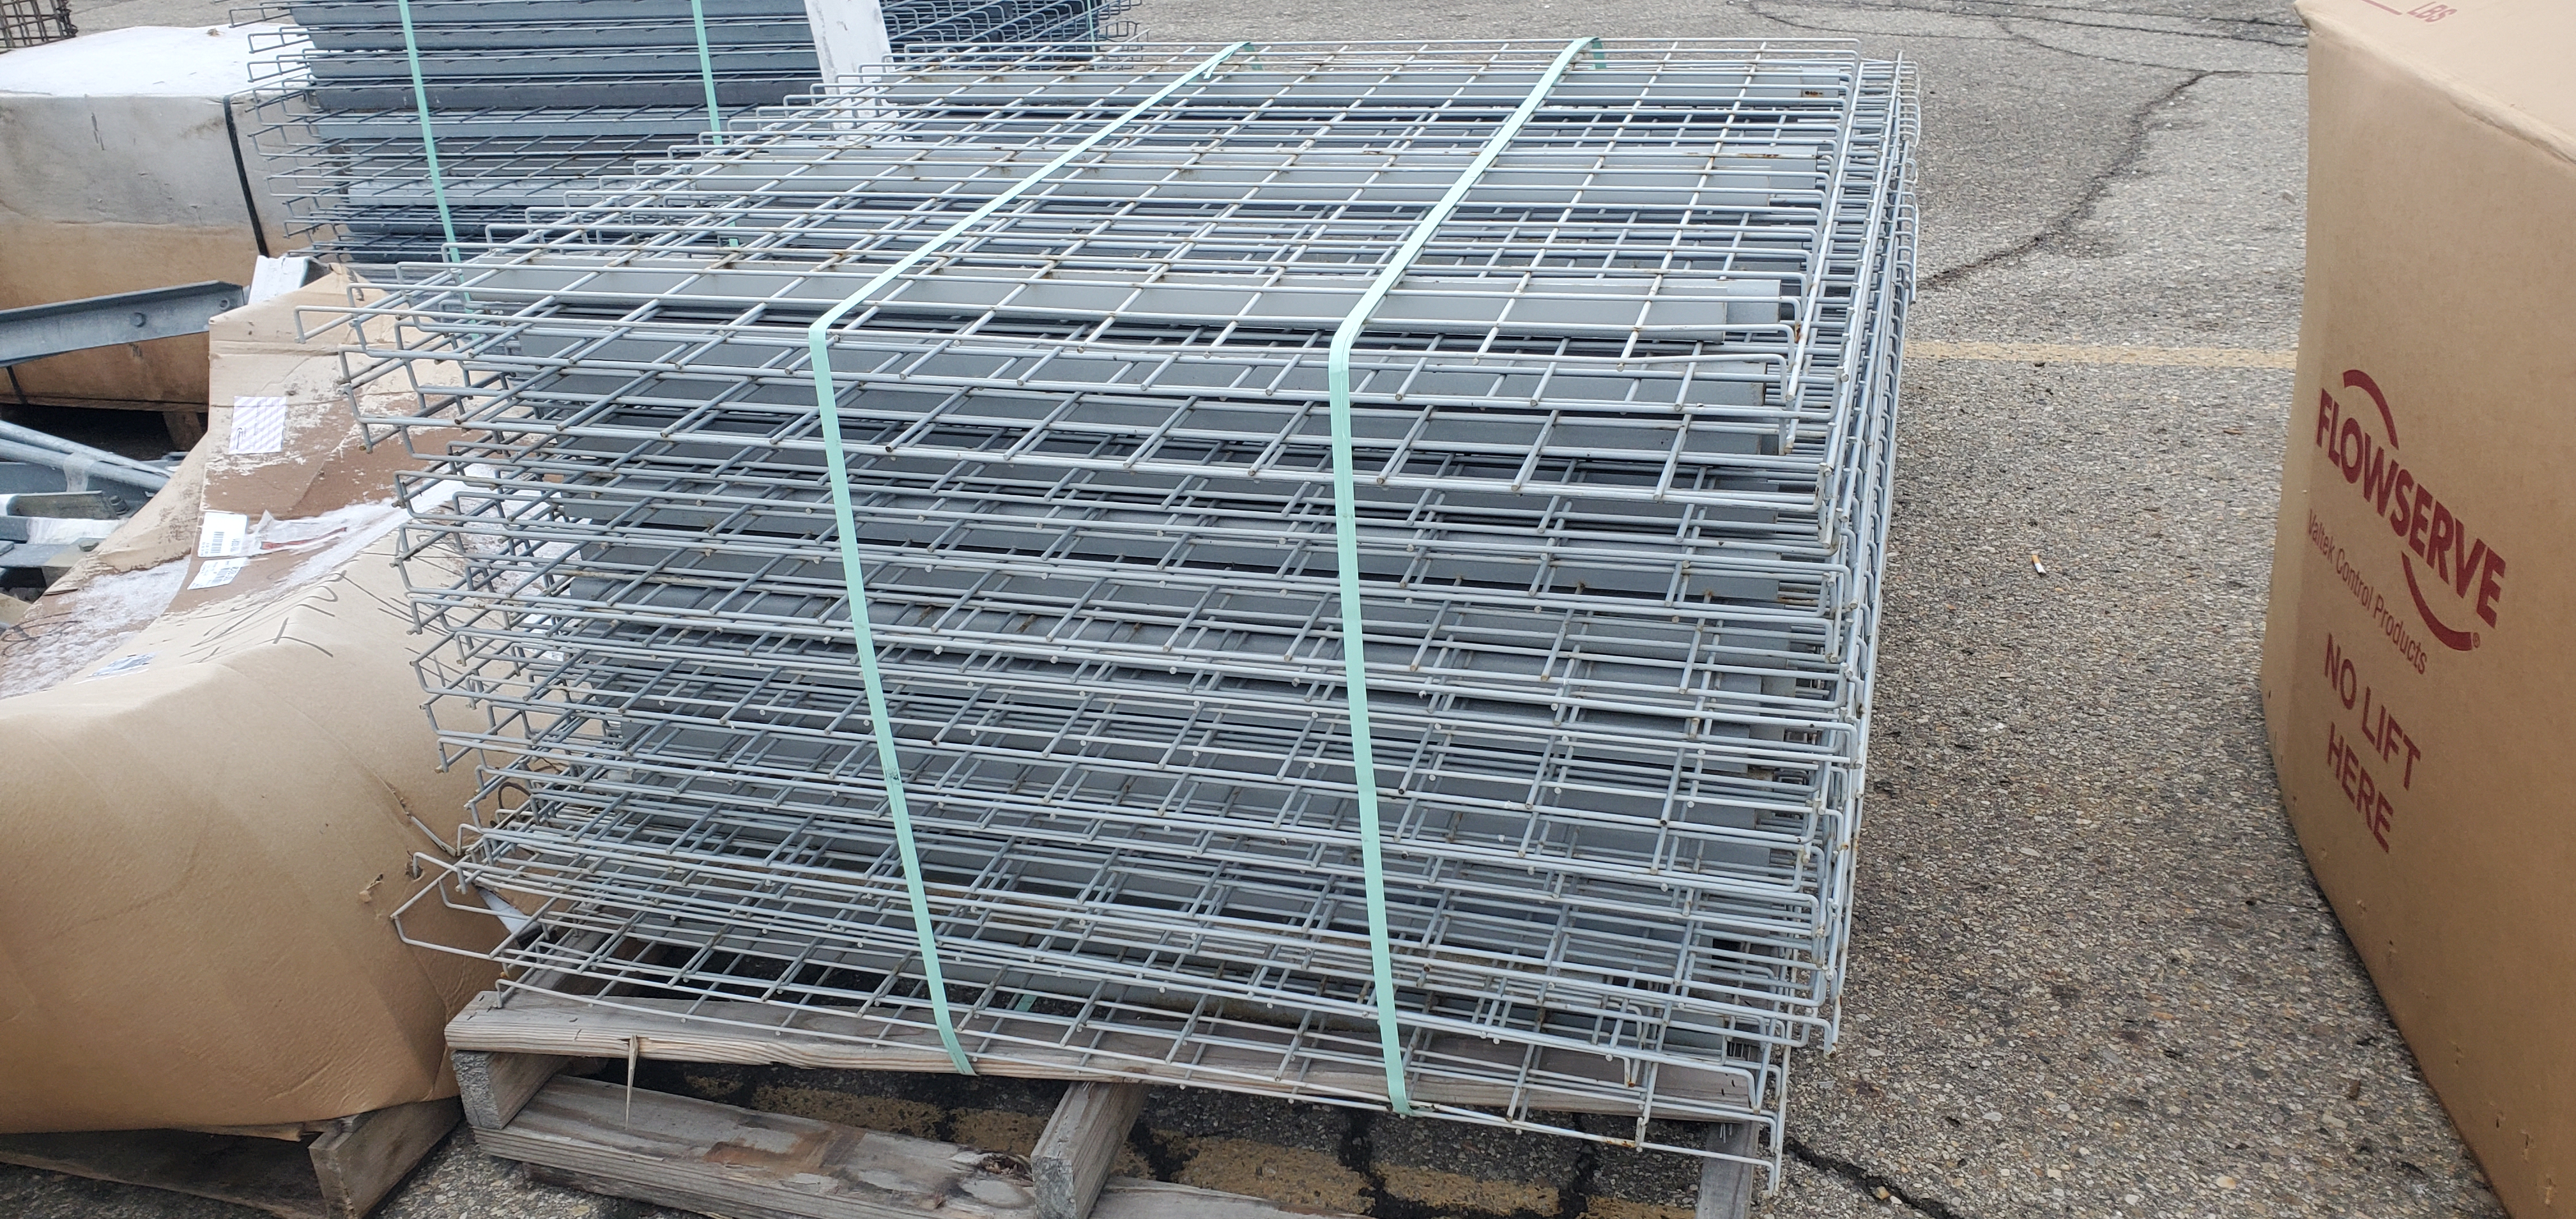 Lot of 28 Used Pallet Racking Grates. 56